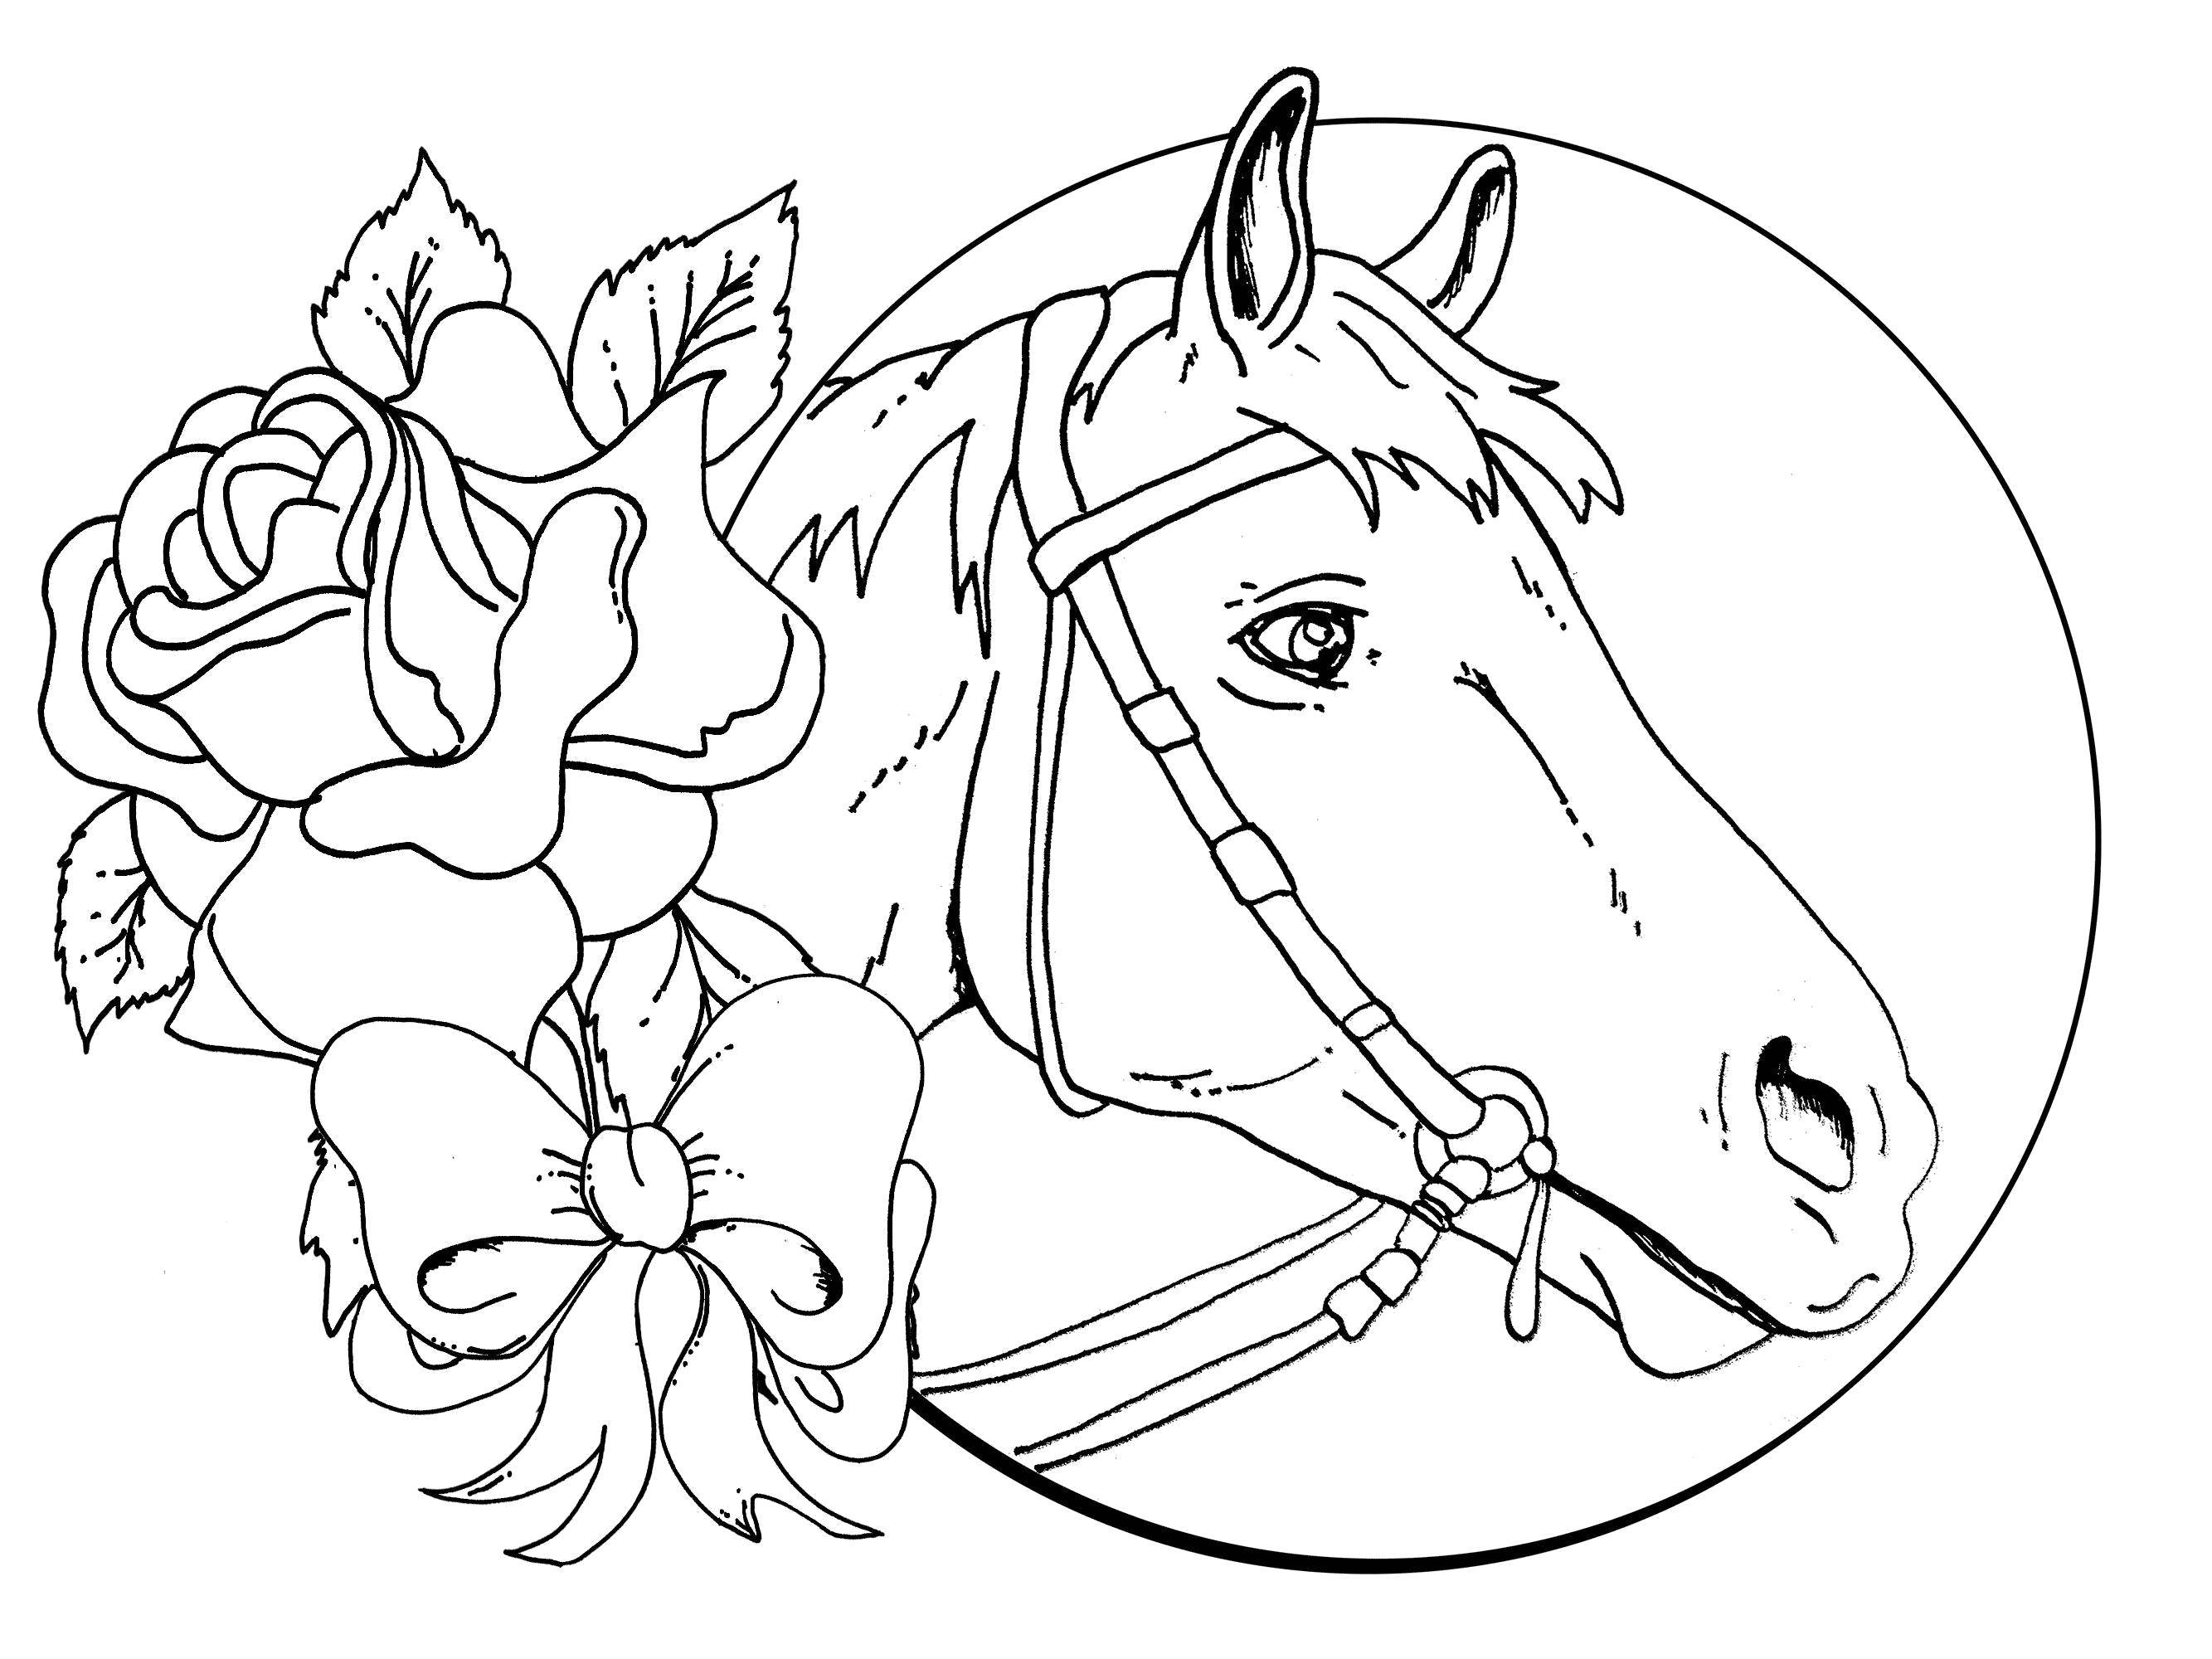 Coloring Graceful horse. Category animals. Tags:  Animals, horse.